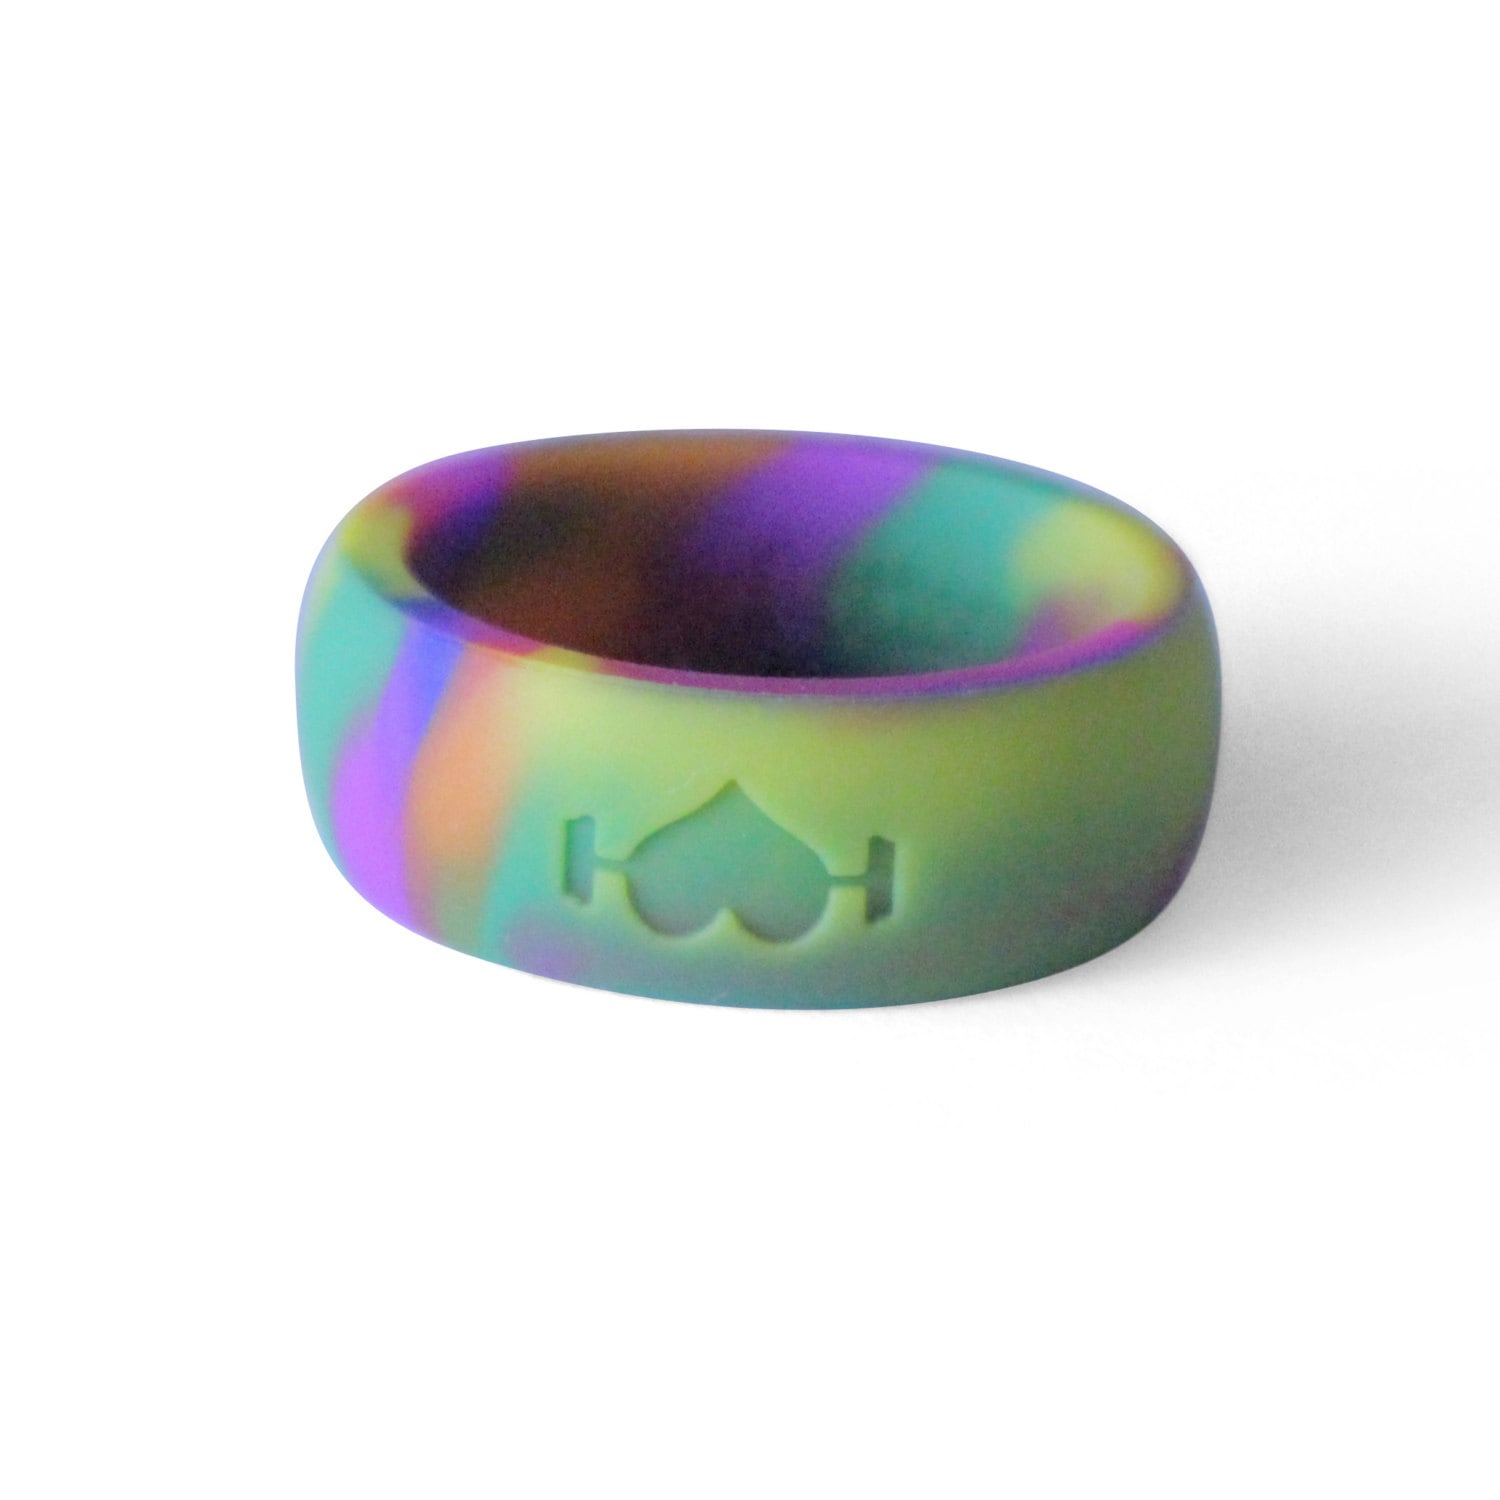 Rainbow Silicone Wedding Ring for Men Perfect for Active